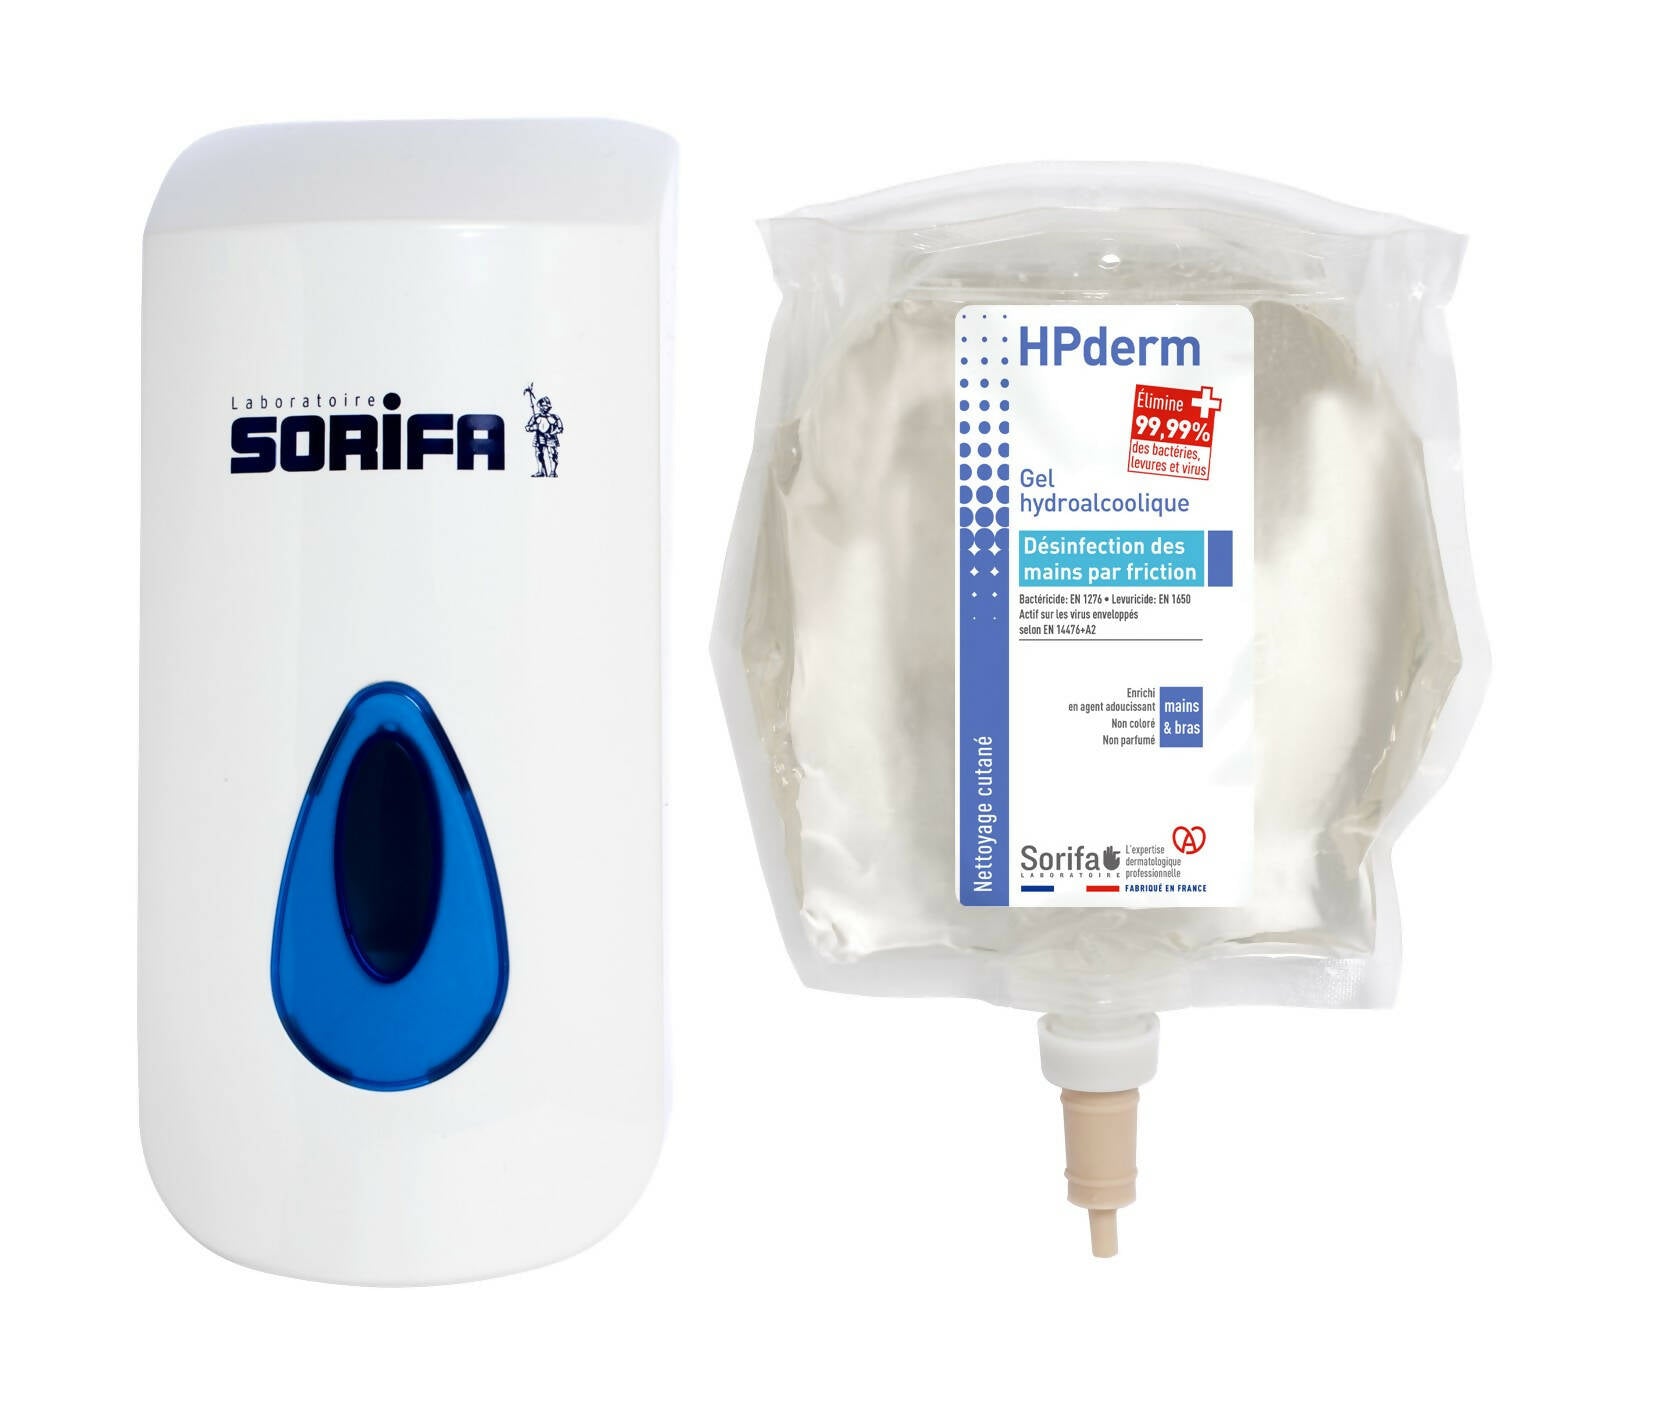 SORIFA - Pack of 2 - HPderm Hydroalcoholic Gel - Hand disinfection by friction - Hands, arms - Enriched with glycerin - Fragrance-free - 800 ml bag for SORIBAG wall dispenser